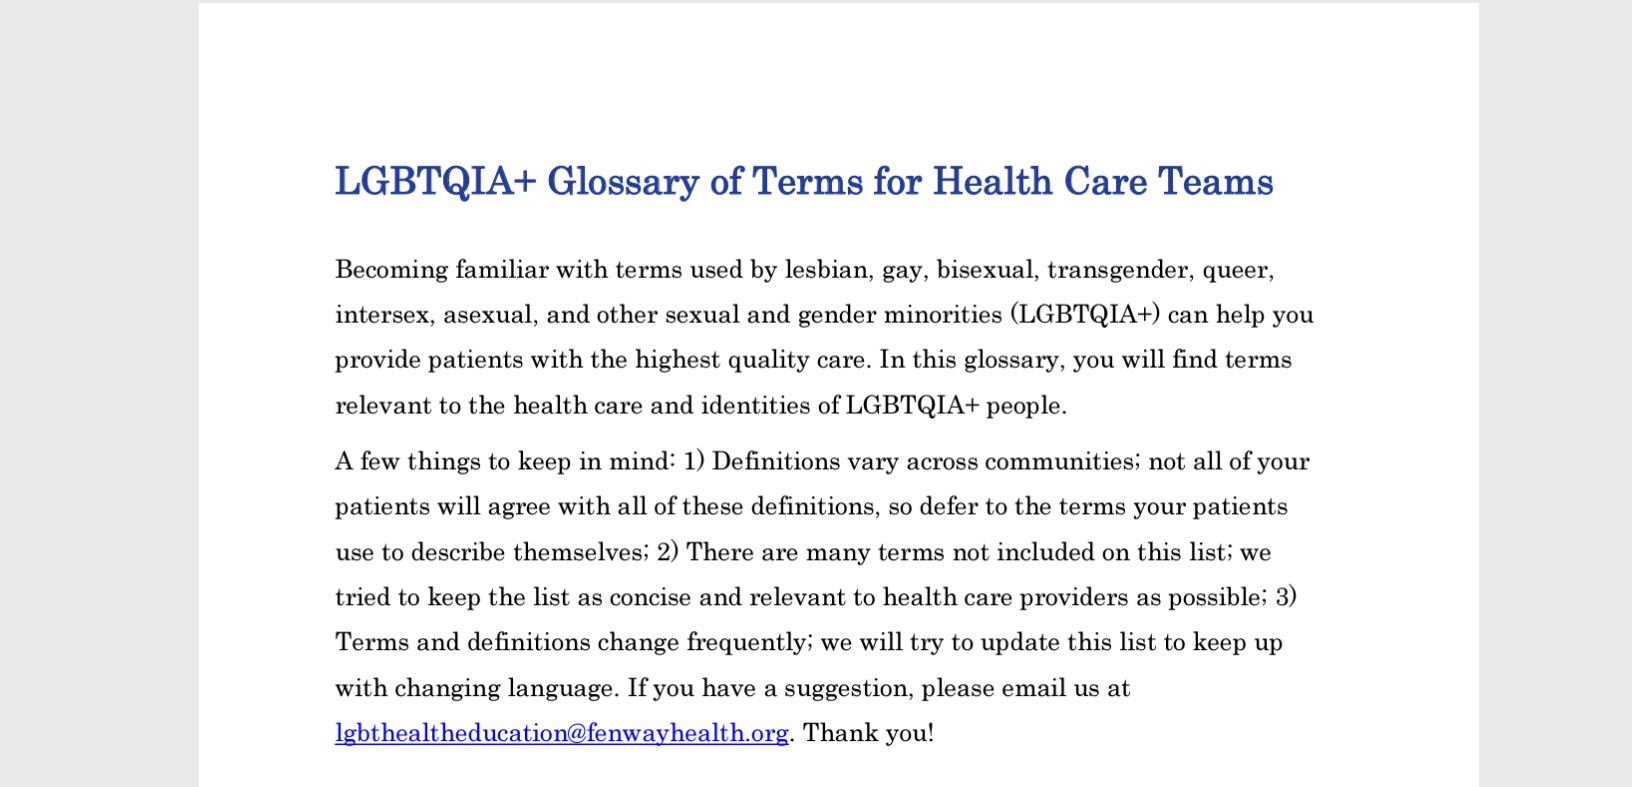 LGBTQIA+ Glossary of Terms for Health Care Teams